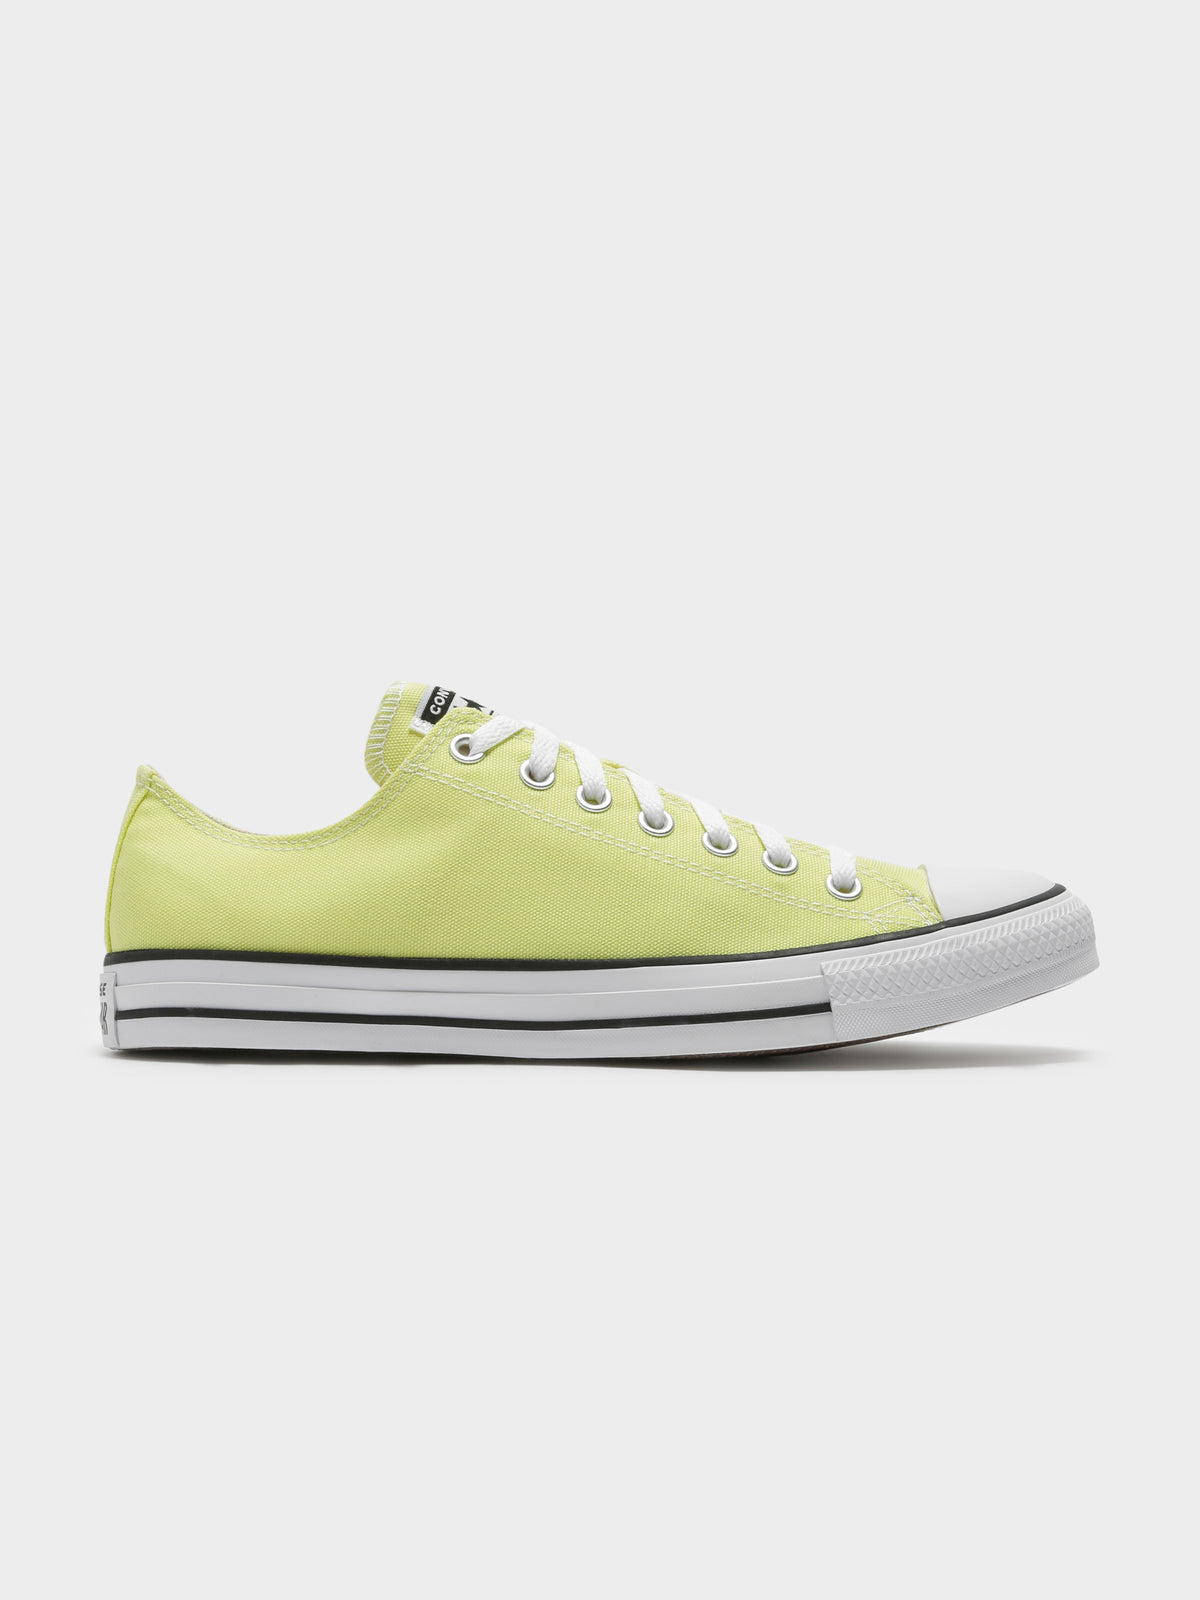 Unisex Chuck Taylor All Star Ox Low Top Sneakers in Light Zitron